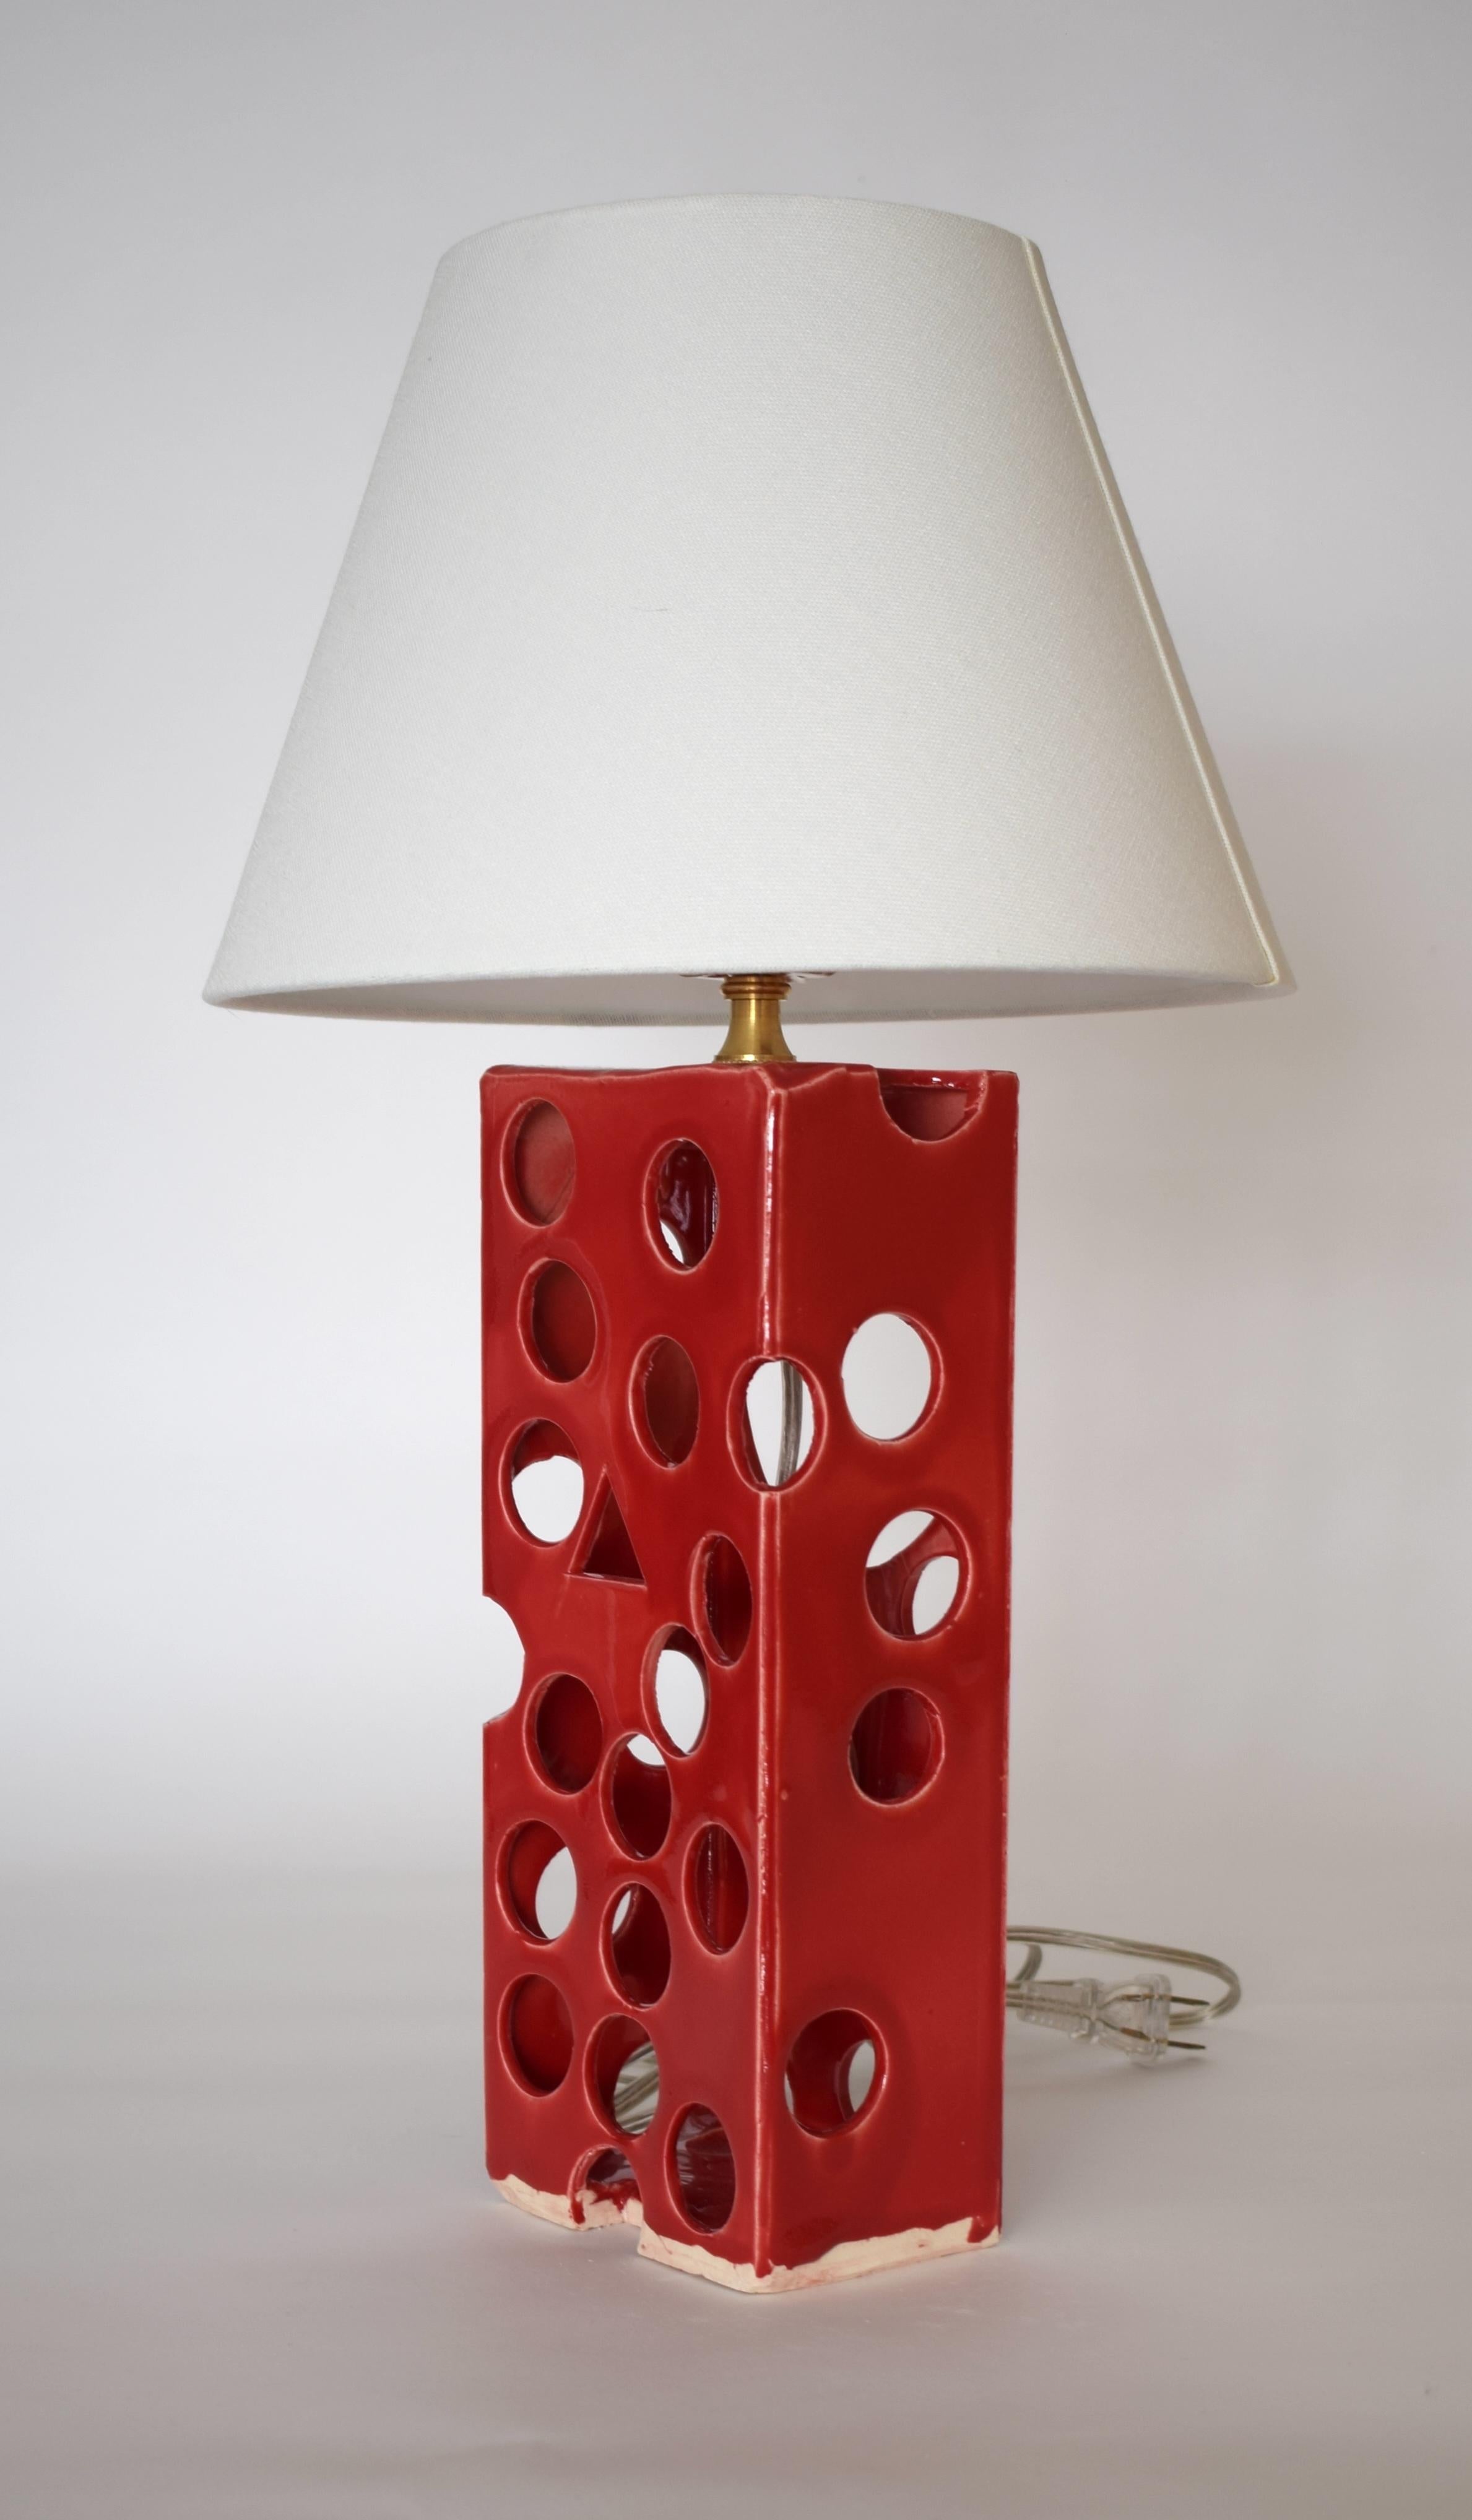 Crafted with precision and sophistication, this one-of-a-kind piece features a rectangular clay prism adorned with a random array of circular openings. This version shown is glazed red (Fabio) and Illuminated by both E26 socket and interior LEDs.